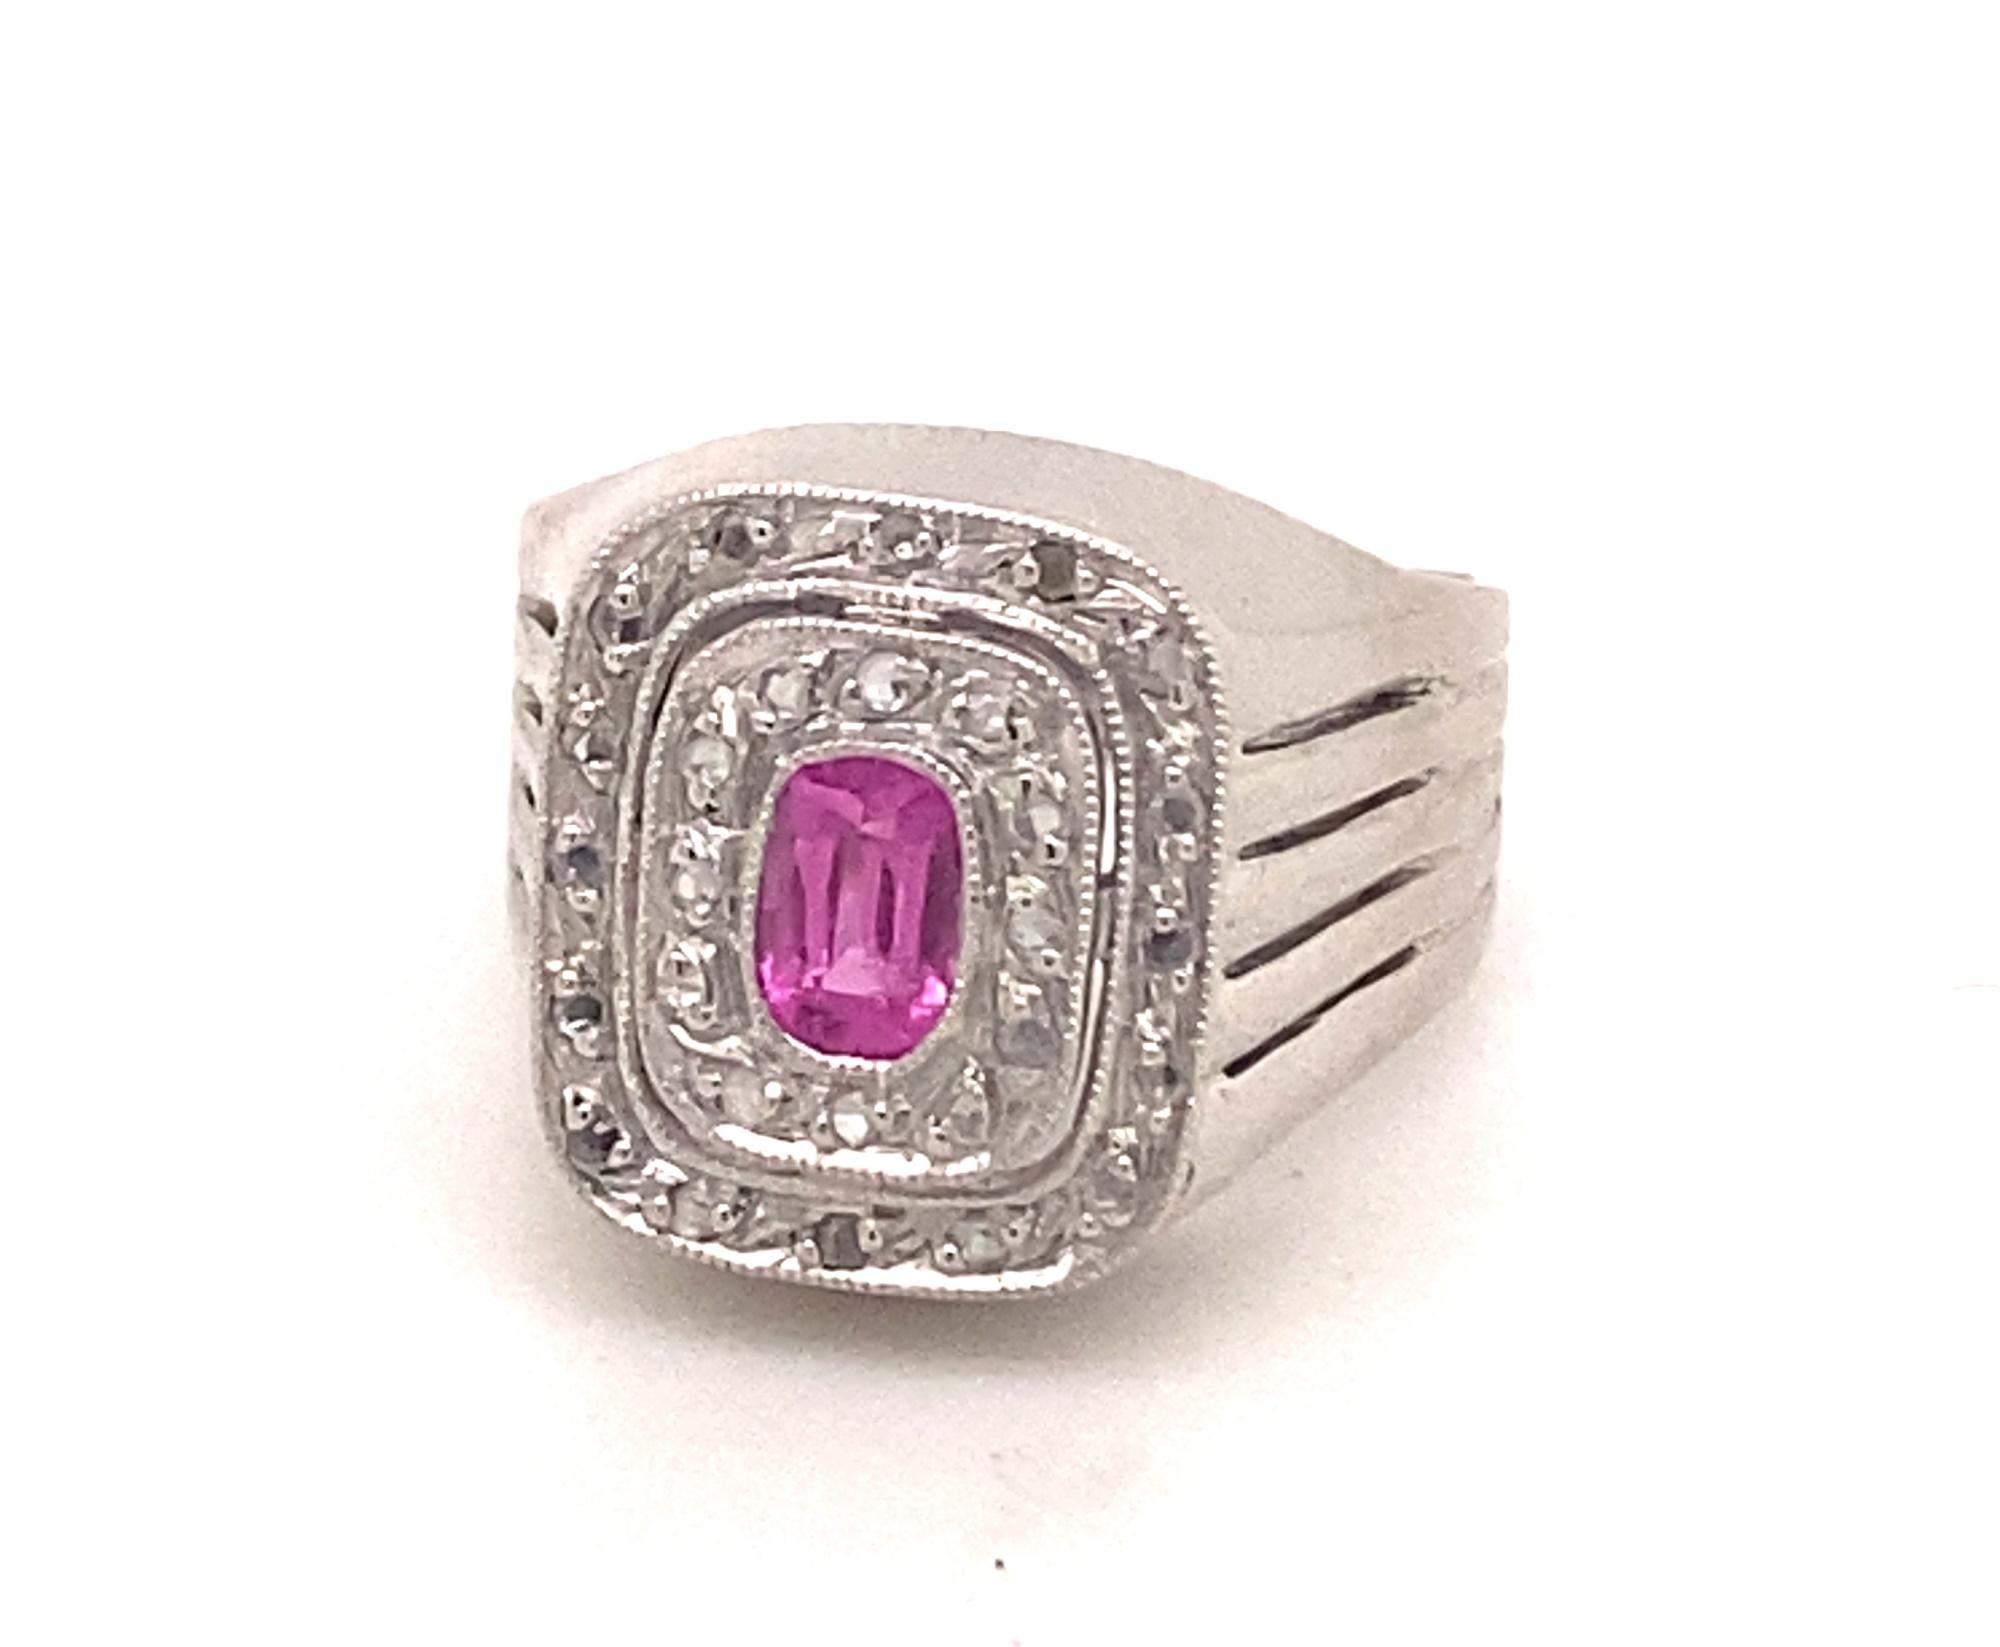 Original Art Deco Pink Tourmaline Diamonds 18K White Gold Ring In Good Condition For Sale In Woodland Hills, CA